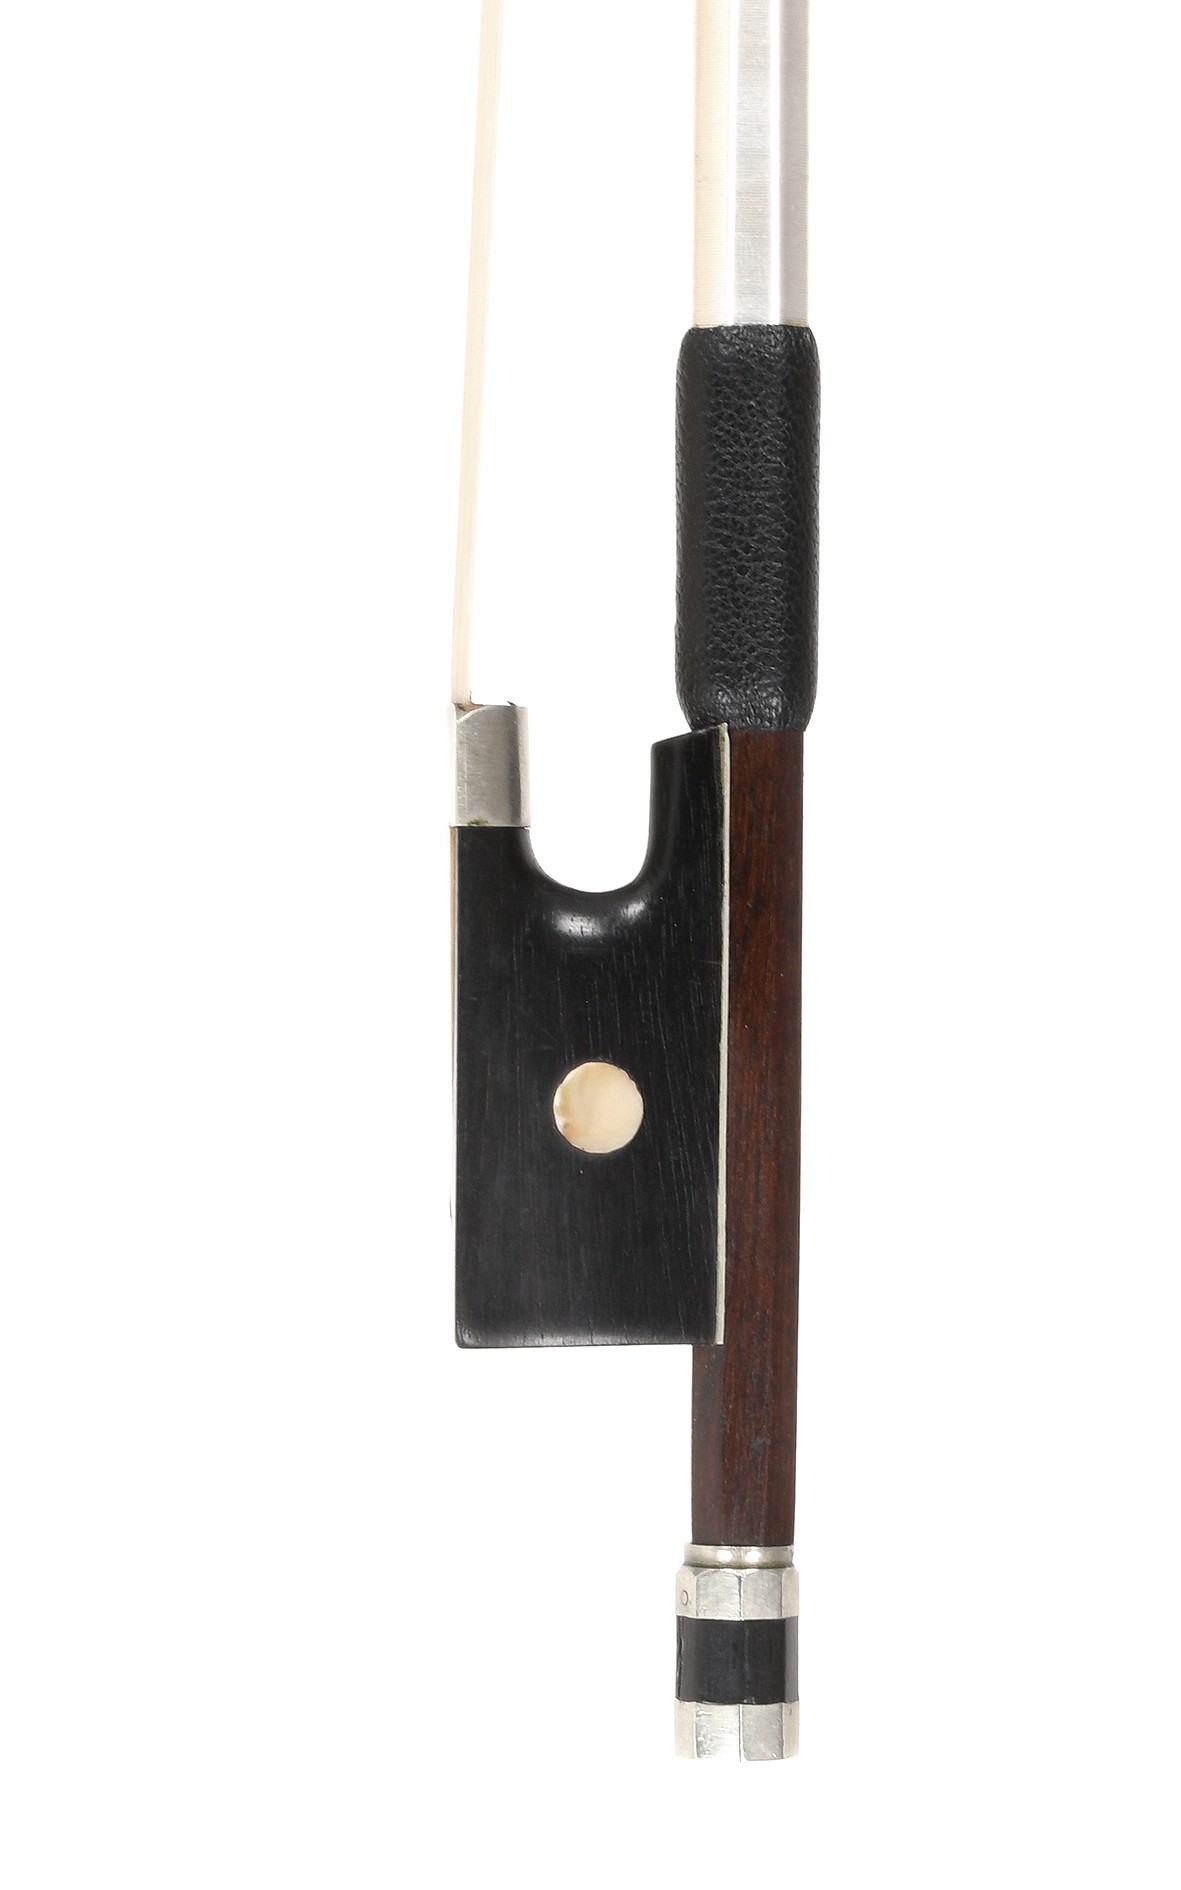 Probably Eugène Cuniot-Hury workshop, French violin bow